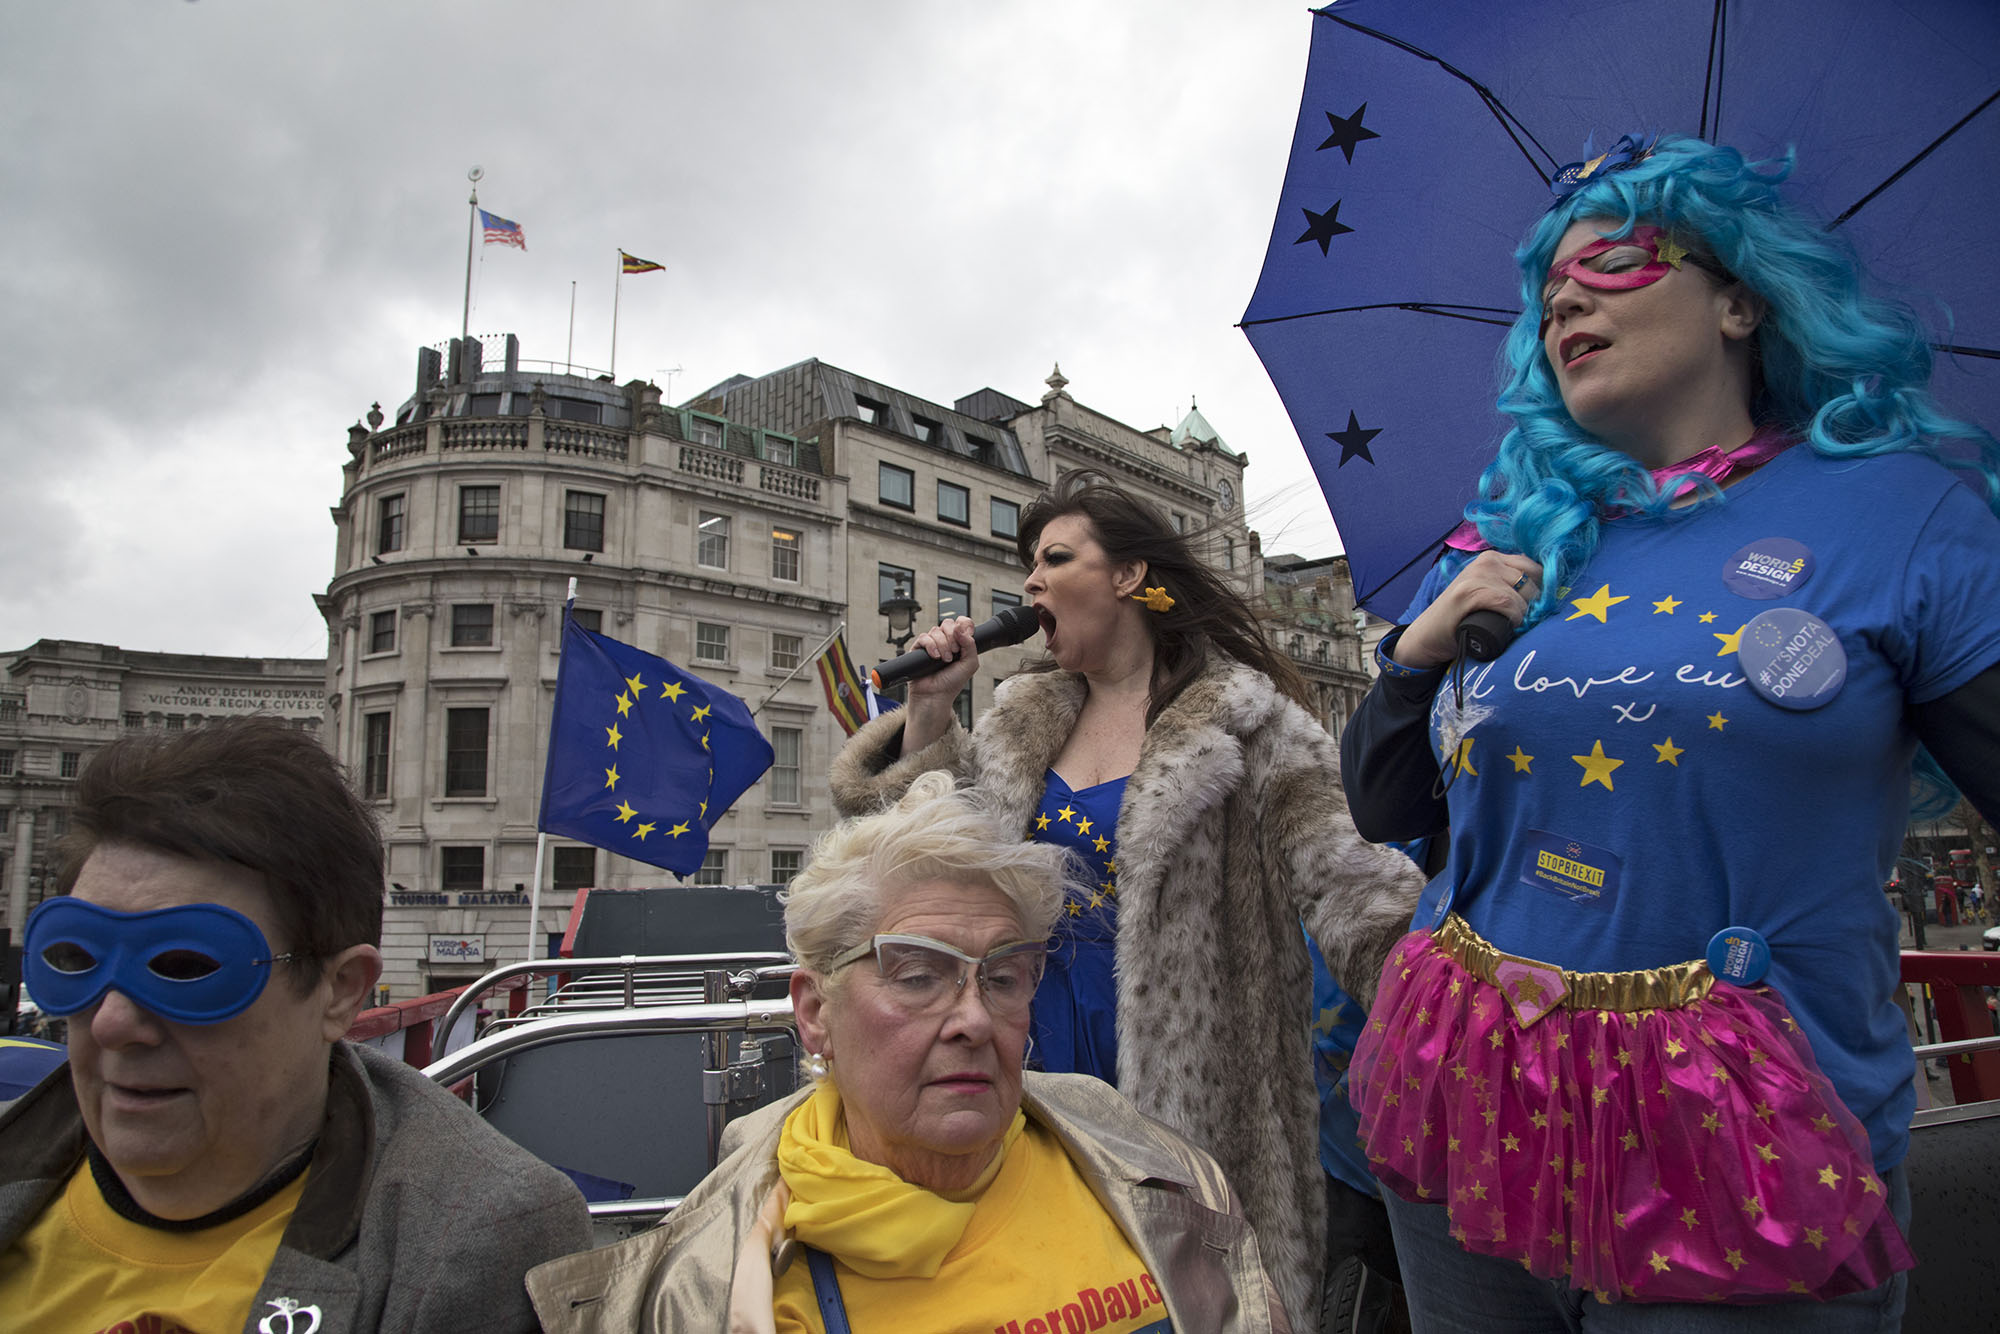  With one year to go until Brexit, anti-Brexit demonstrators protest aboard an EU superhero Brexit battle bus. 